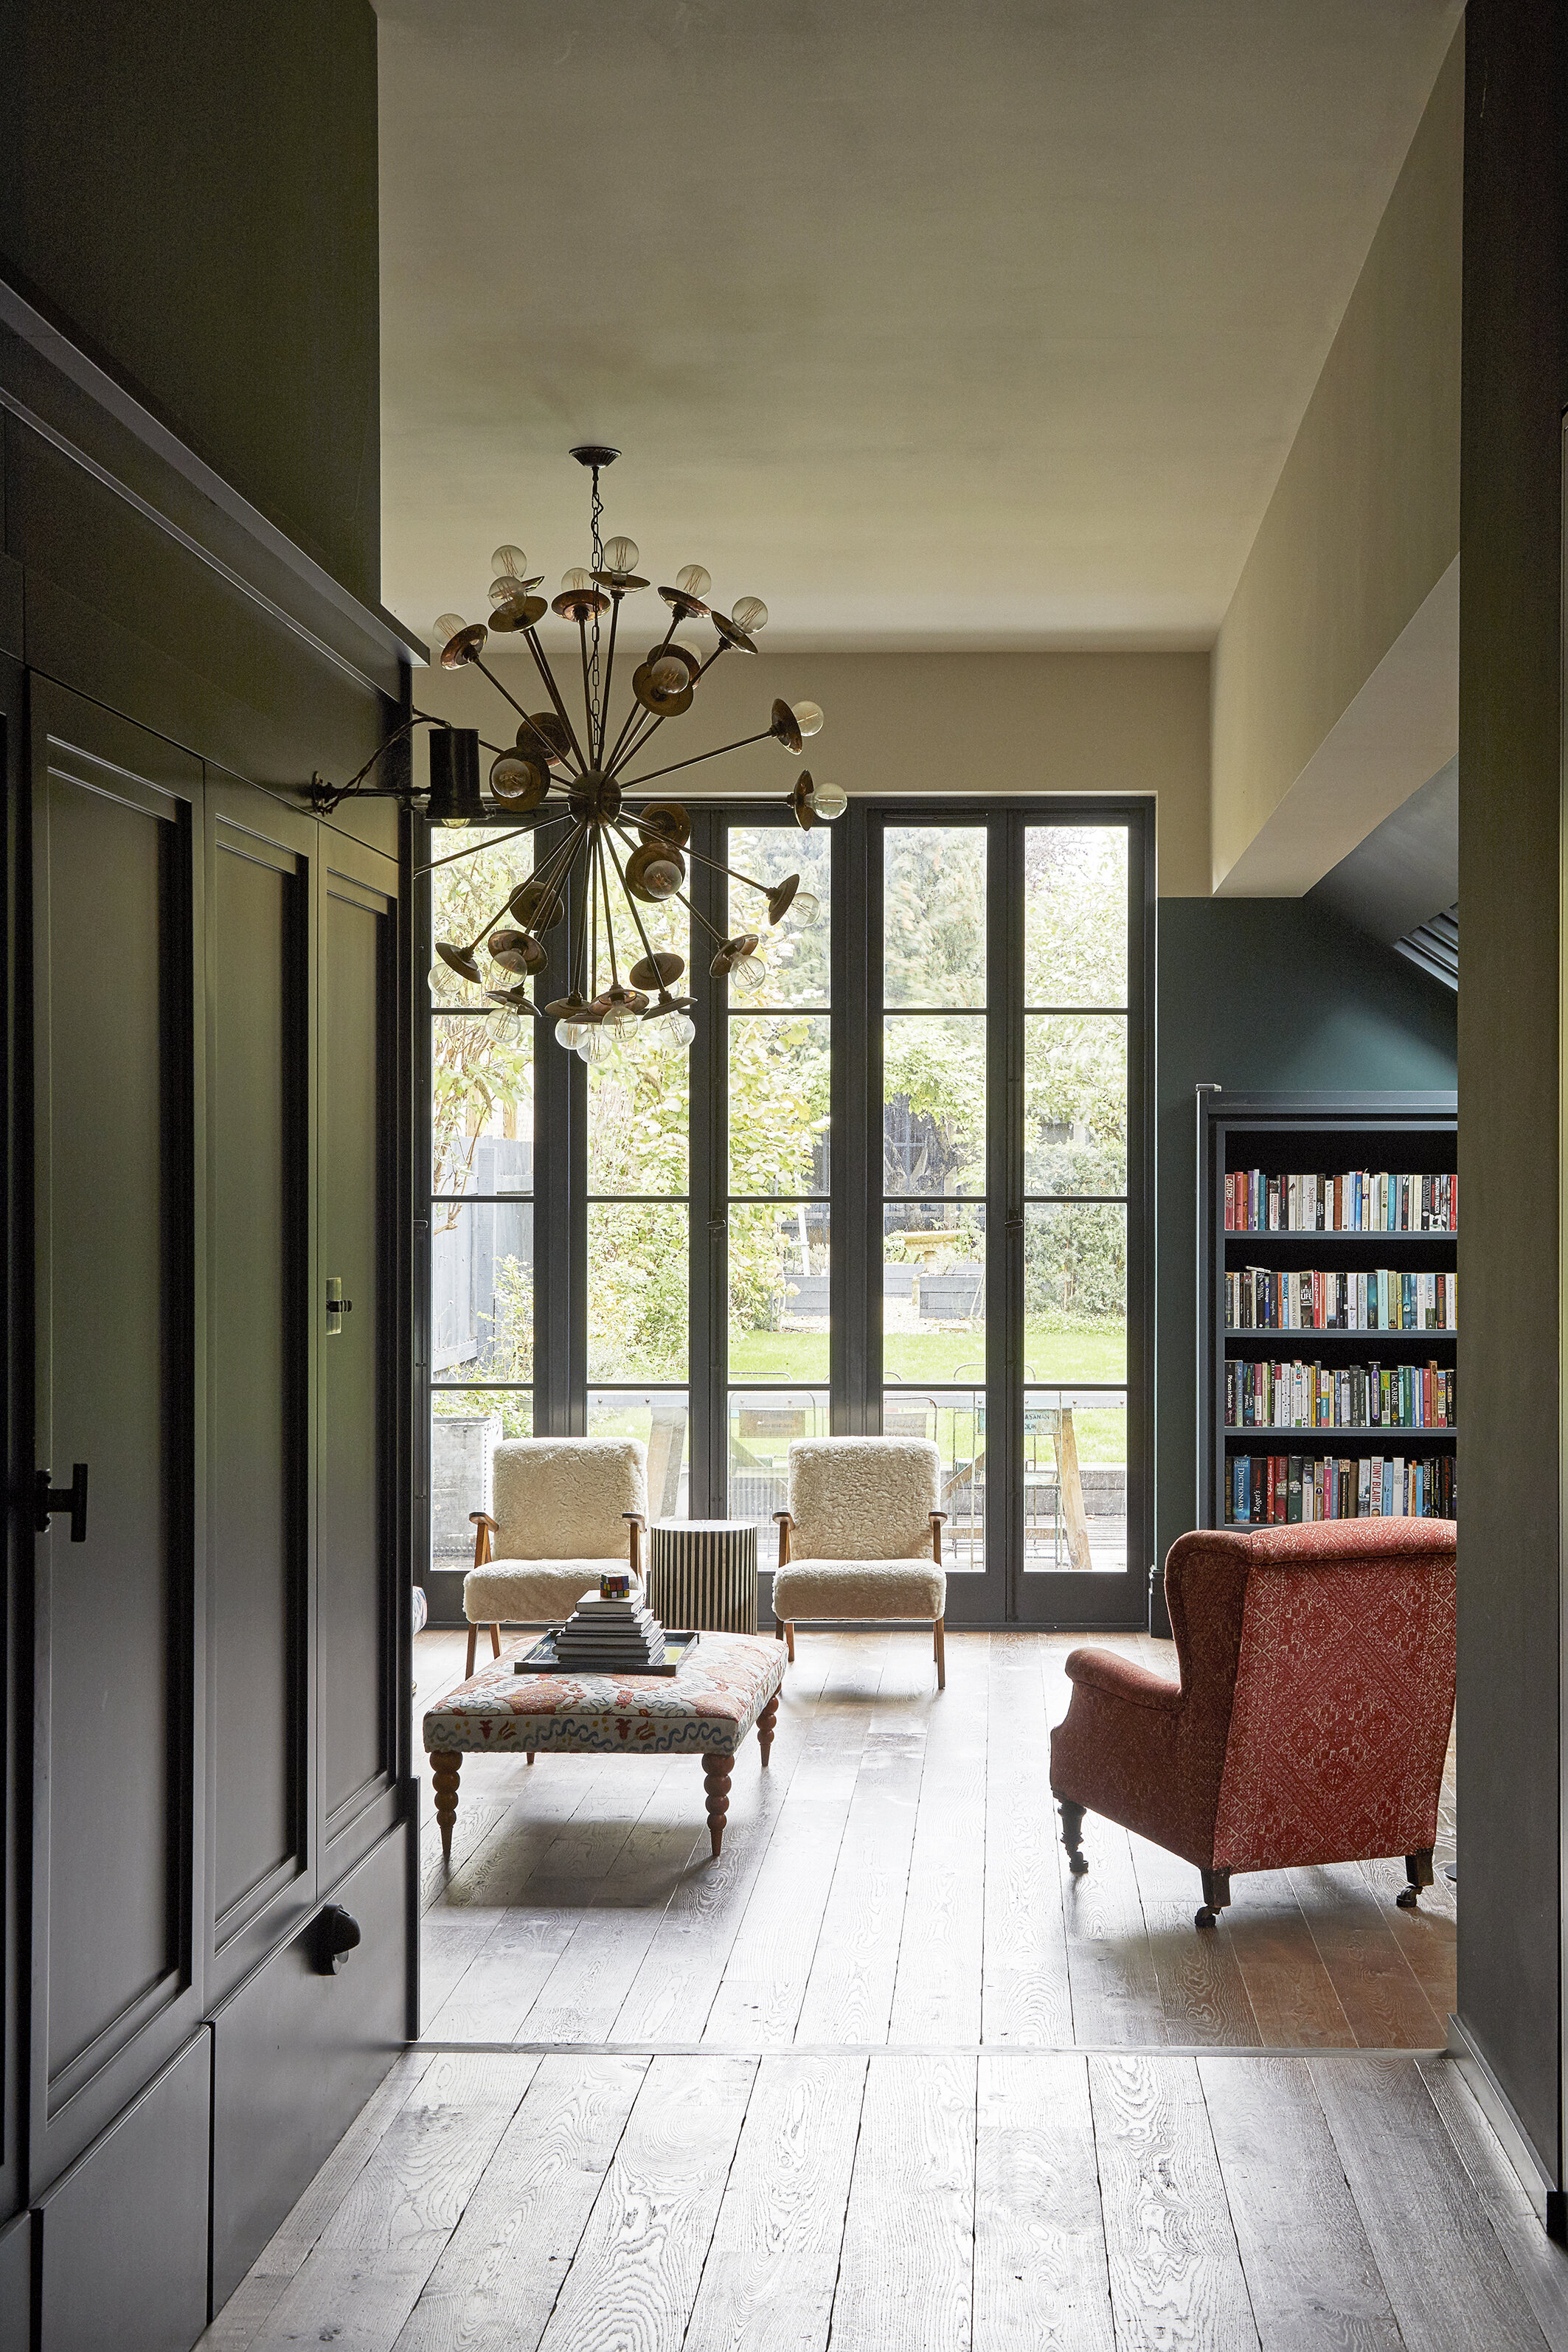 Interiors by Kate Guinness Design. Photography by Anna Stathaki